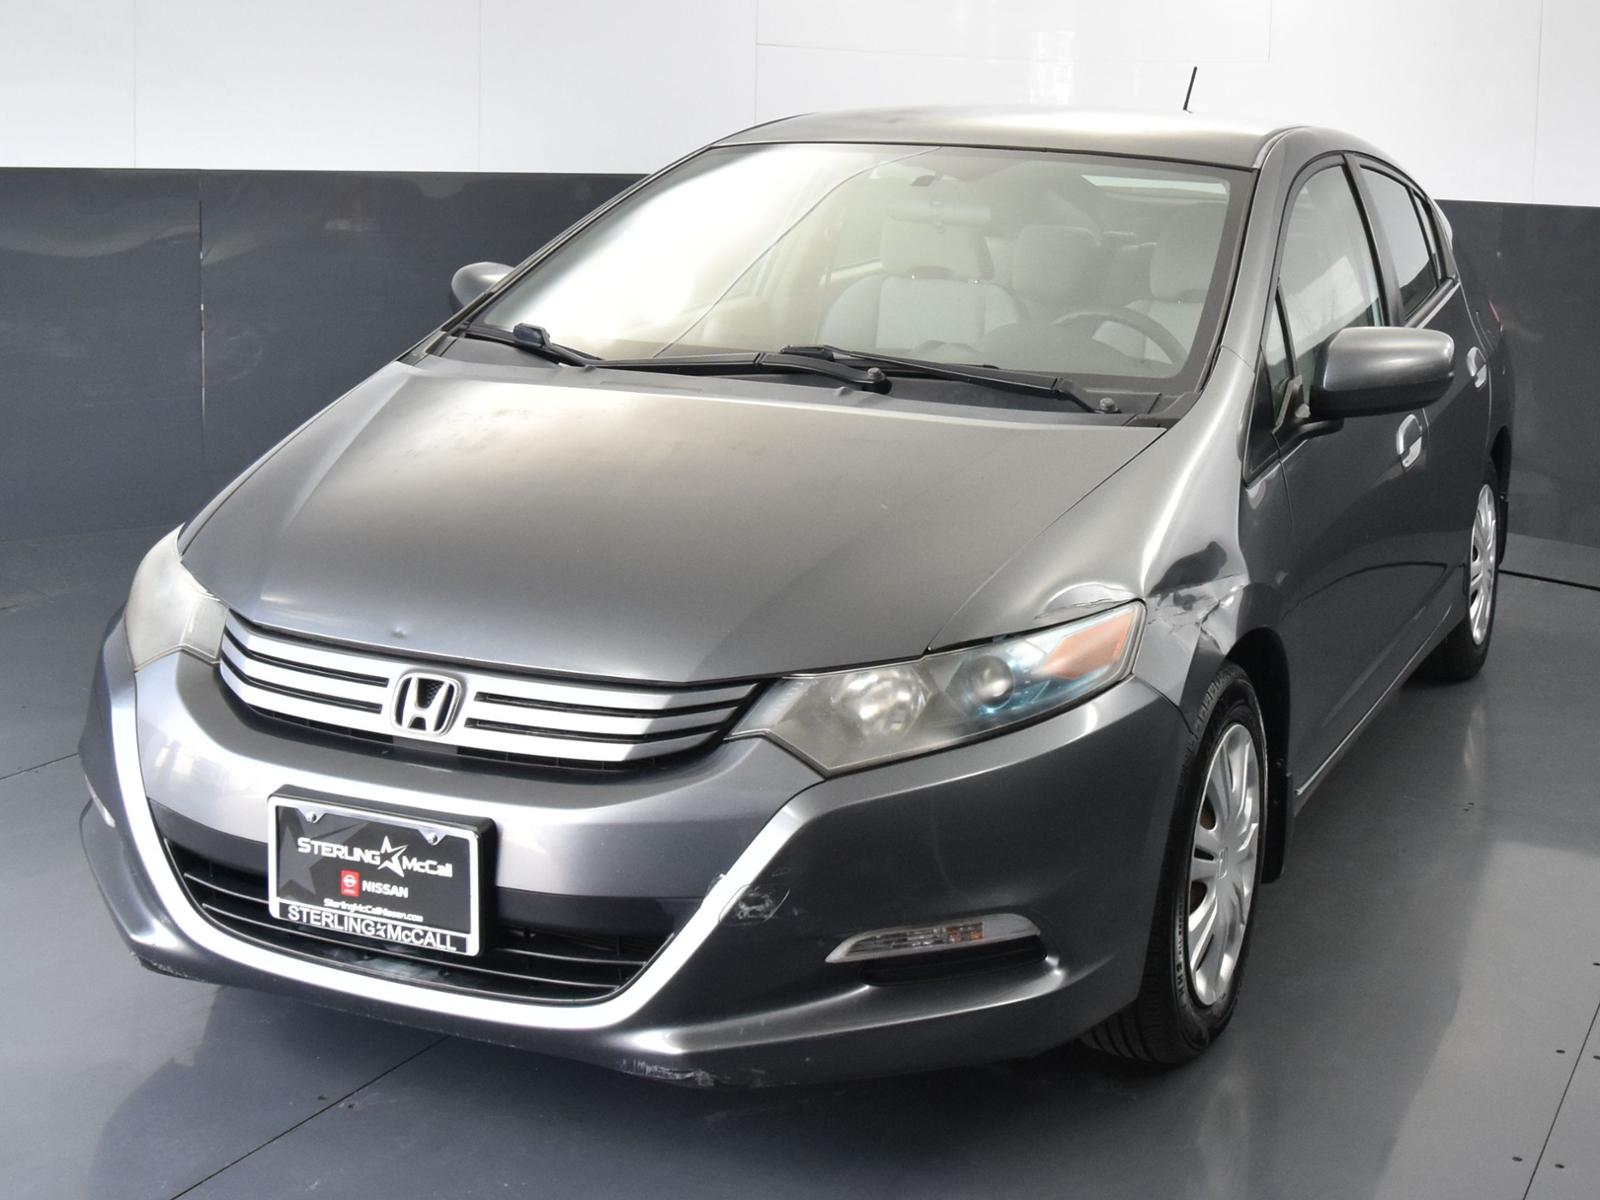 Pre-Owned 2011 Honda Insight 5dr CVT 4dr Car in Houston #BS003158 |  Sterling McCall Lexus